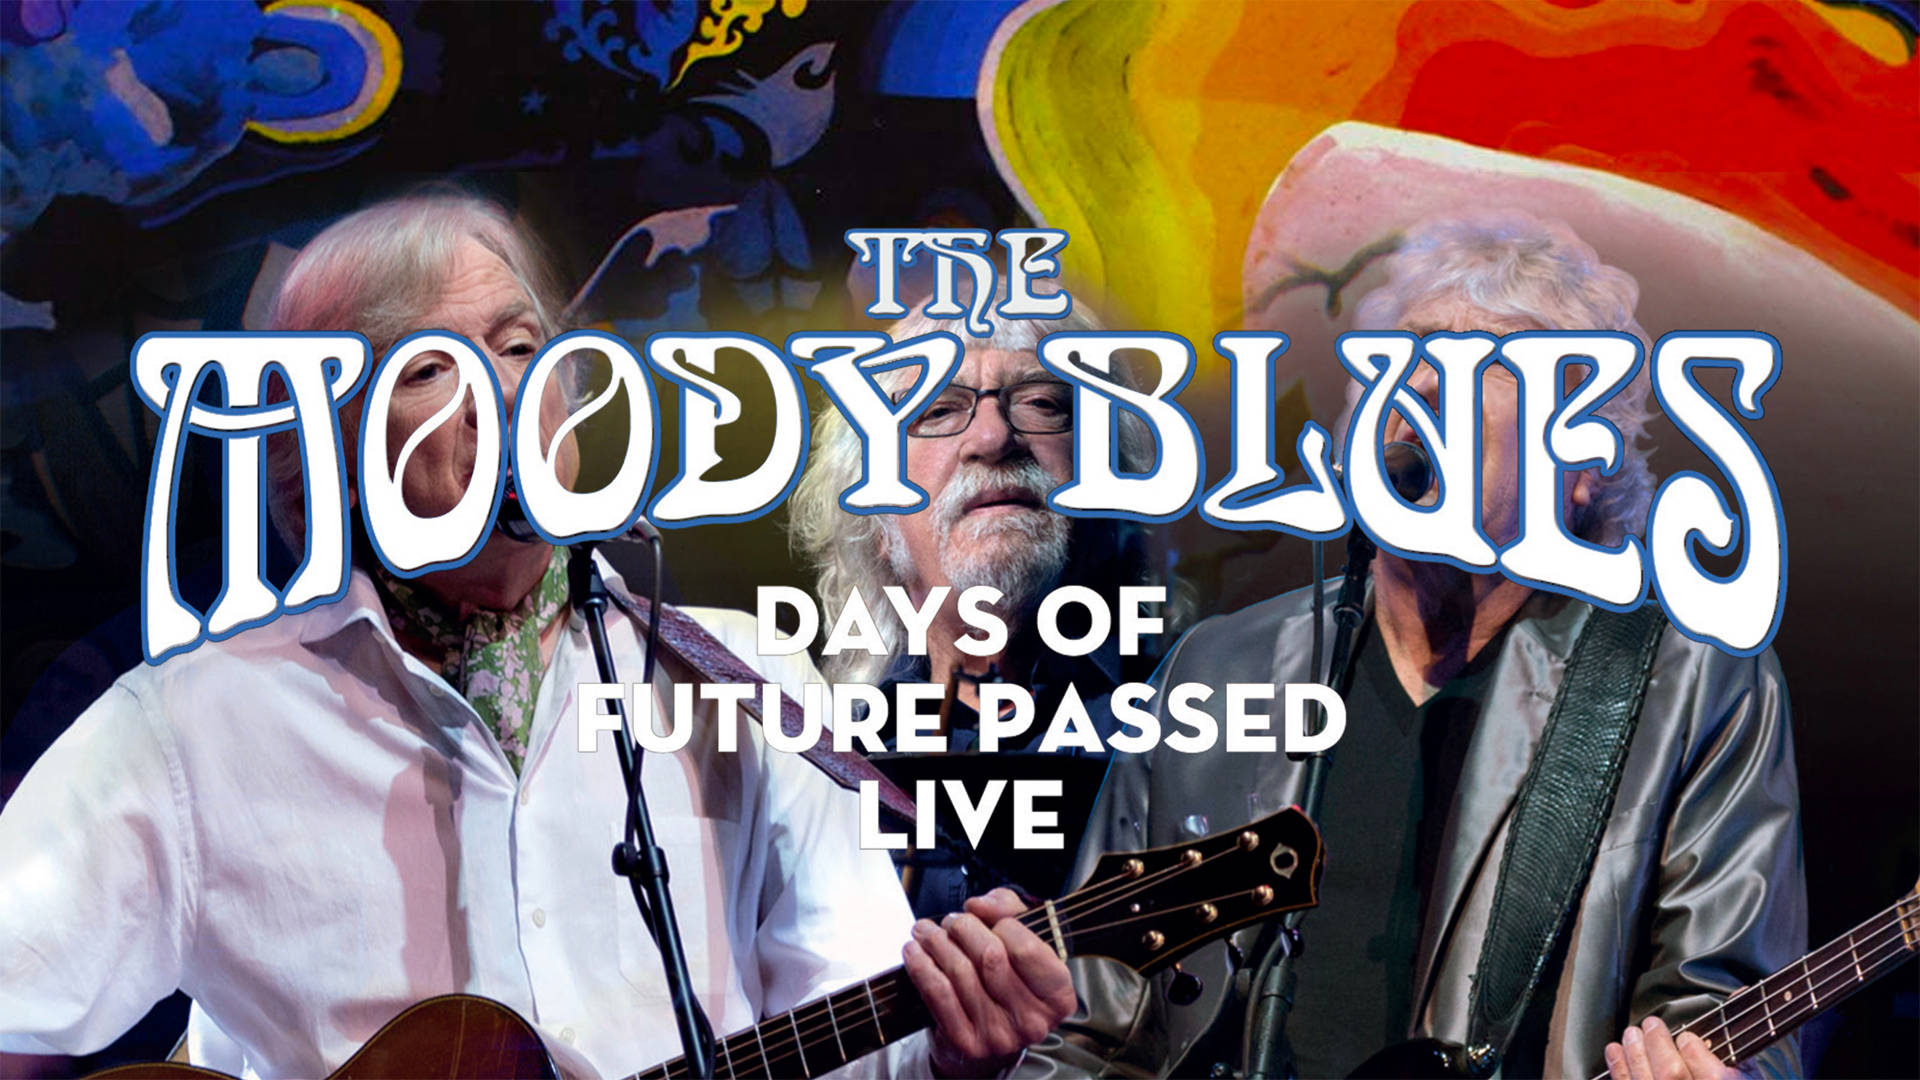 Denmoody Blues Days Of Future Passed Live Film. Wallpaper